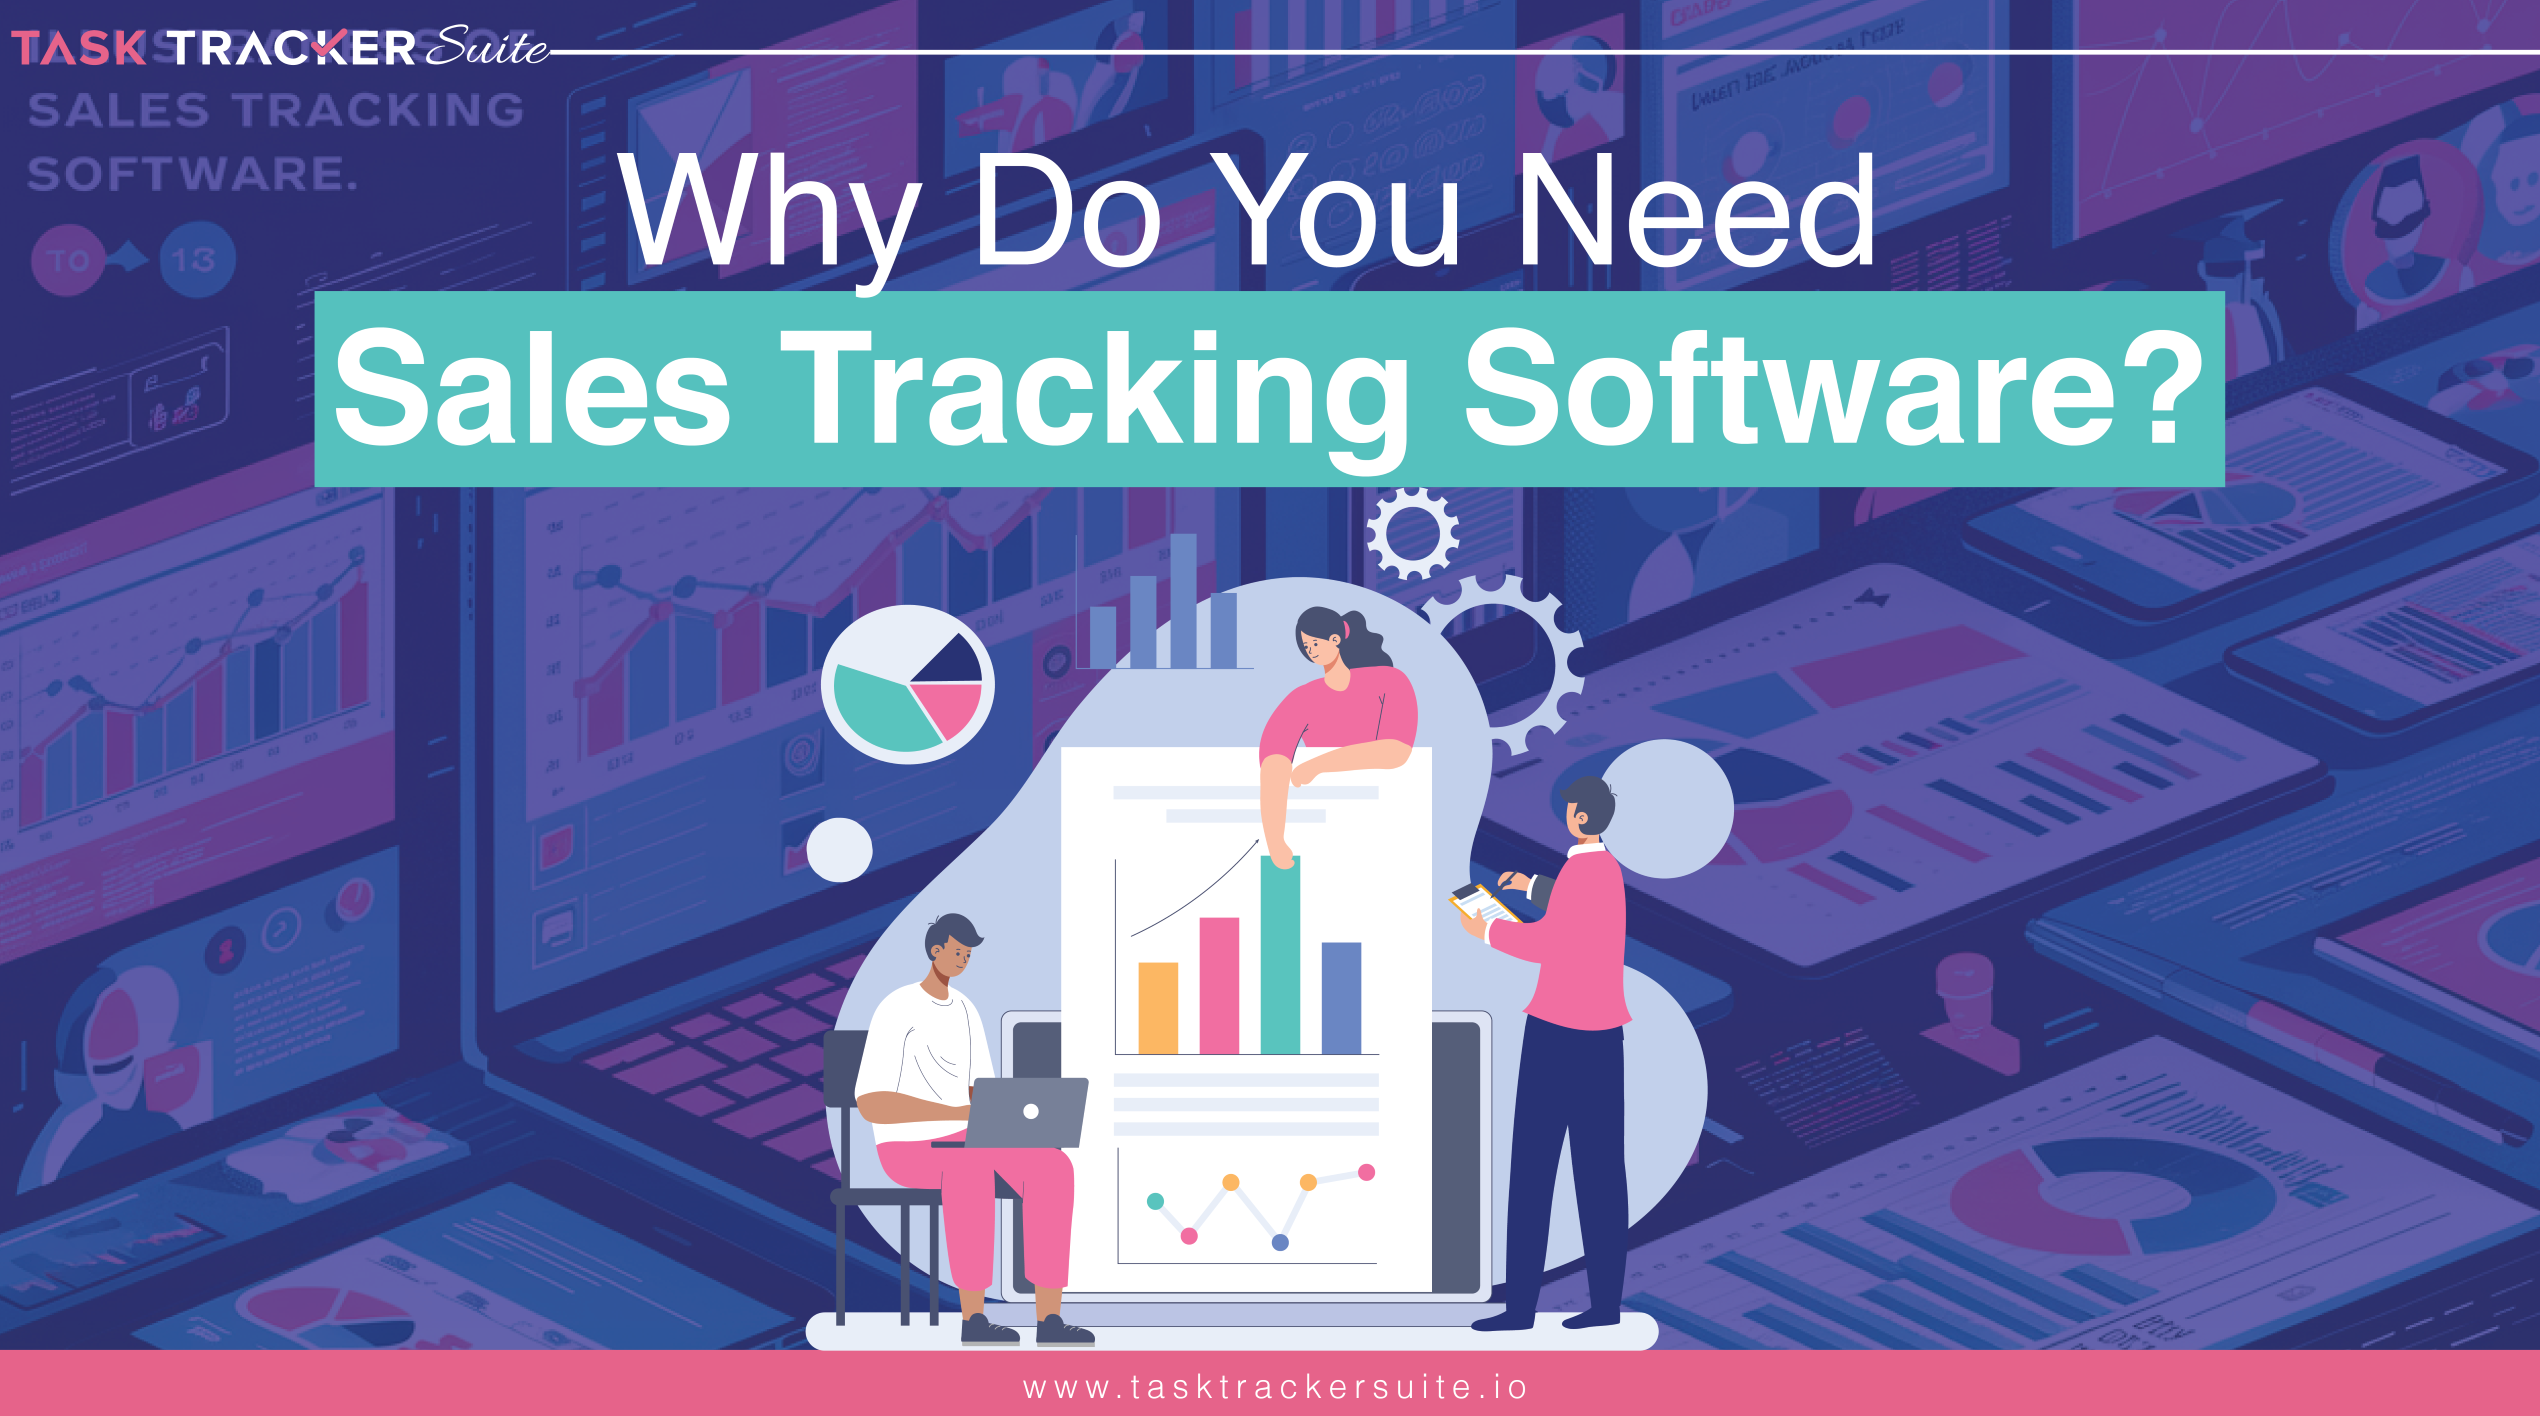 Why Do You Need Sales Tracking Software?